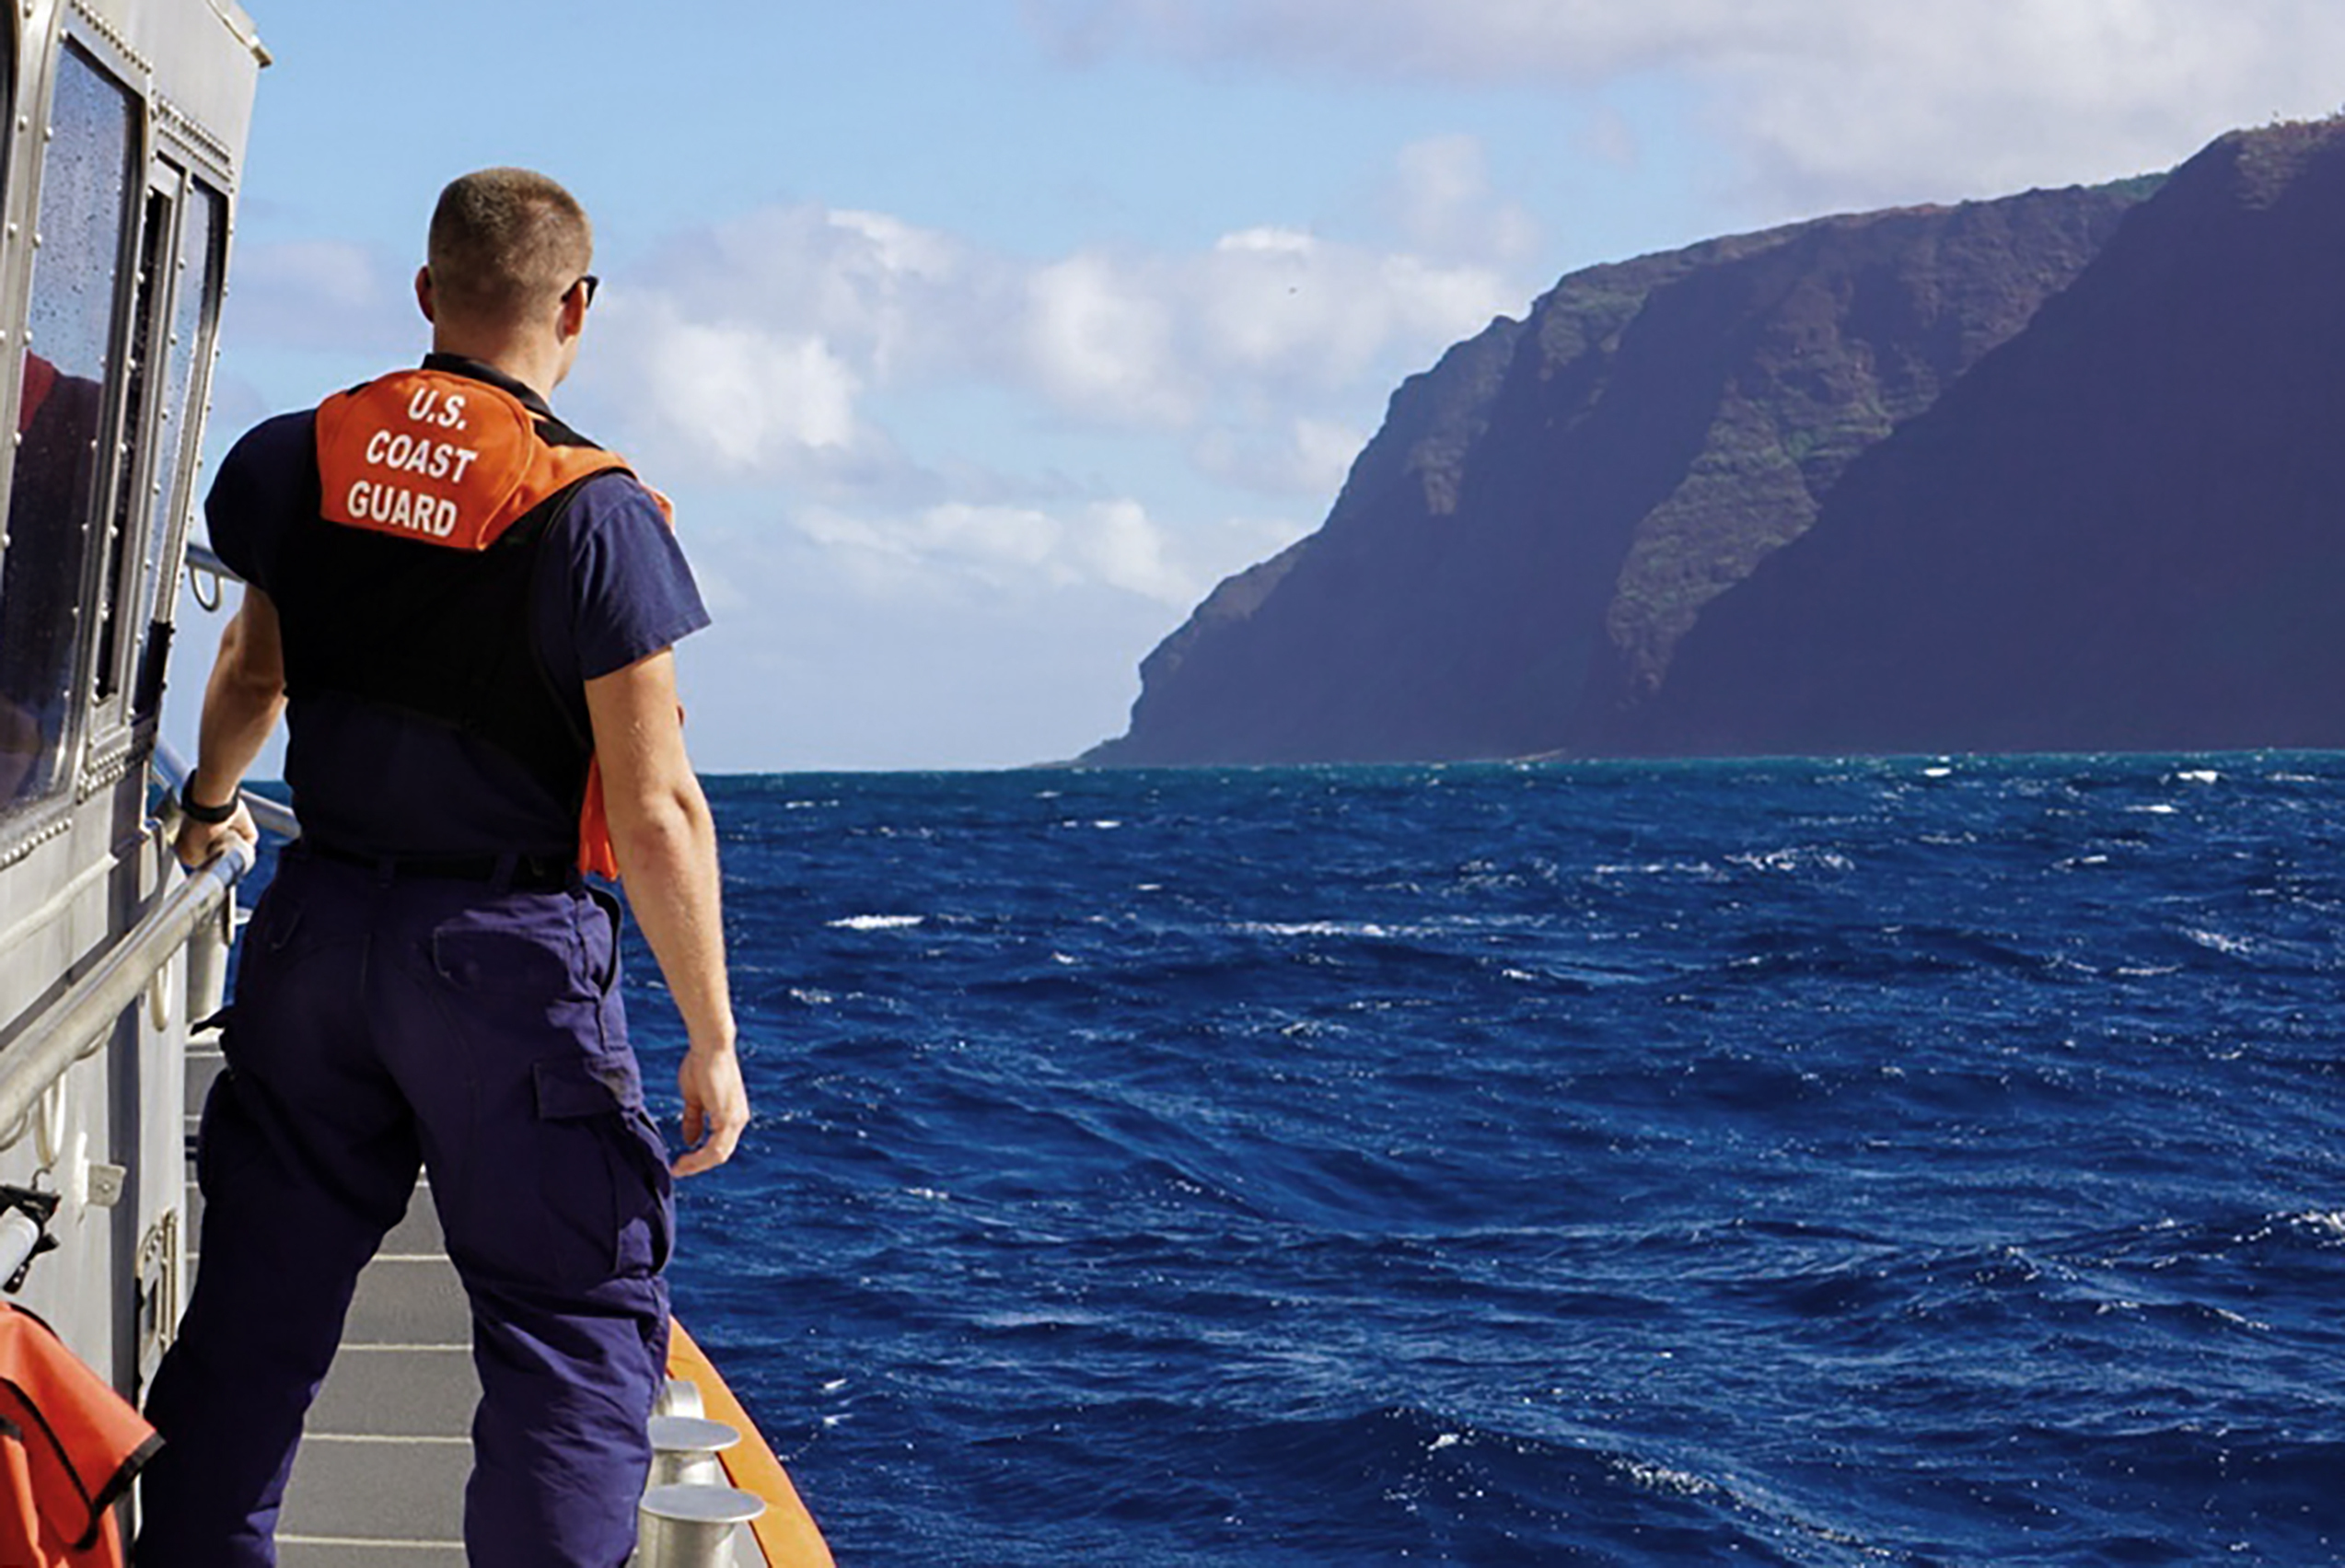 In this photo released by the U.S. Coast Guard, Coast Guard Cutter William Hart moves toward the Na Pali Coast on the Hawaiian island of Kauai on Friday, Dec. 27, 2019, the day after a tour helicopter disappeared with seven people aboard. Authorities say wreckage of the helicopter has been found in a mountainous area on the island. (Lt. j.g. Daniel Winter/U.S. Coast Guard via AP)